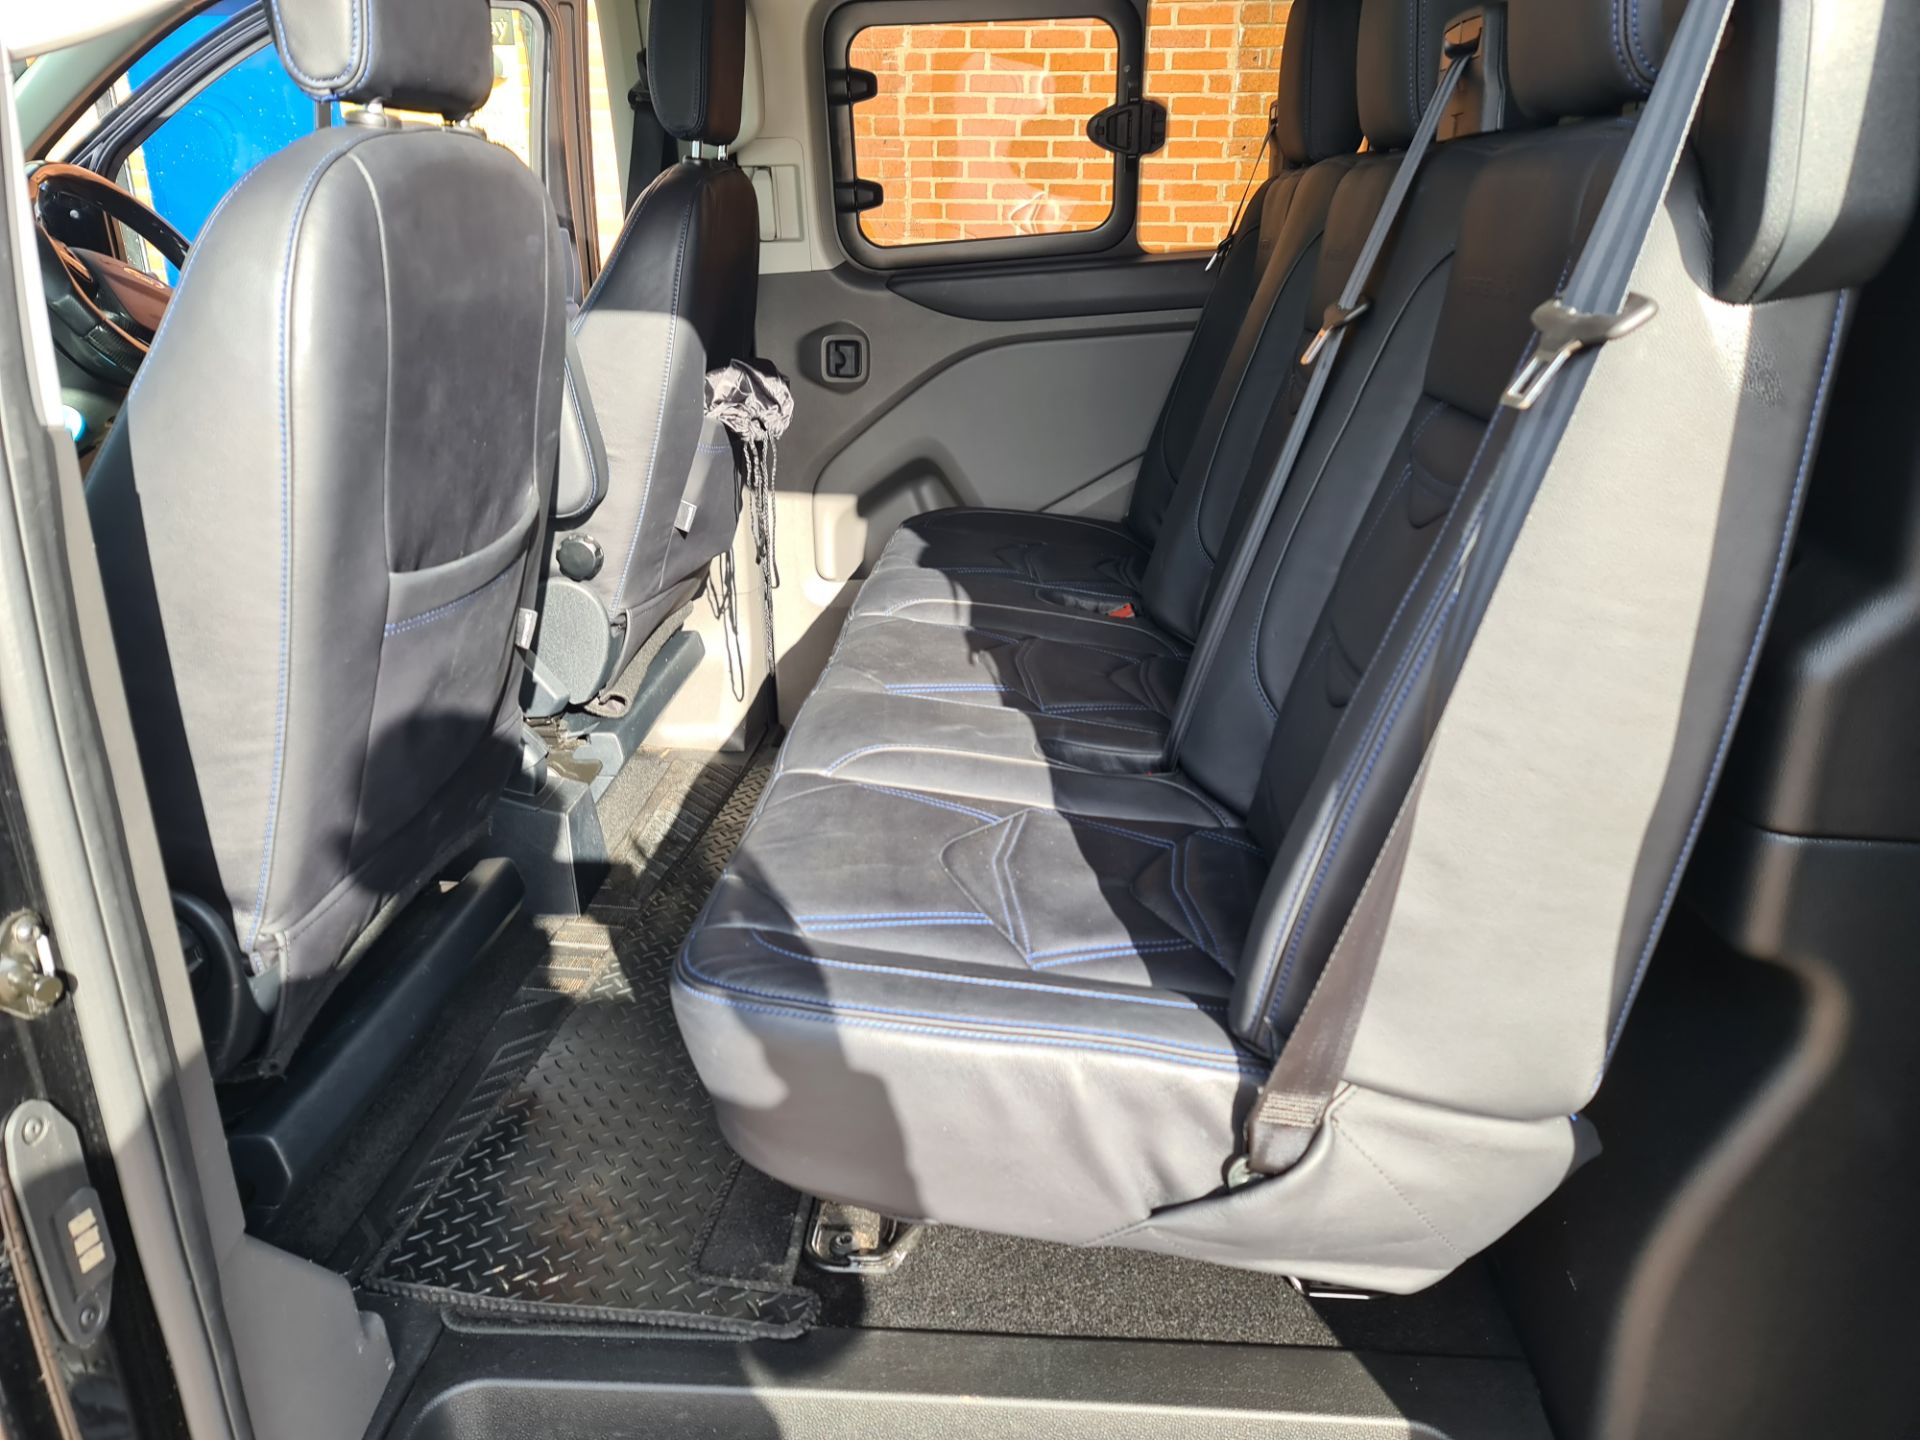 2021 Ford Transit 320LMTD Motion R panel van, auto gearbox, Ultra High Spec - Image 47 of 102